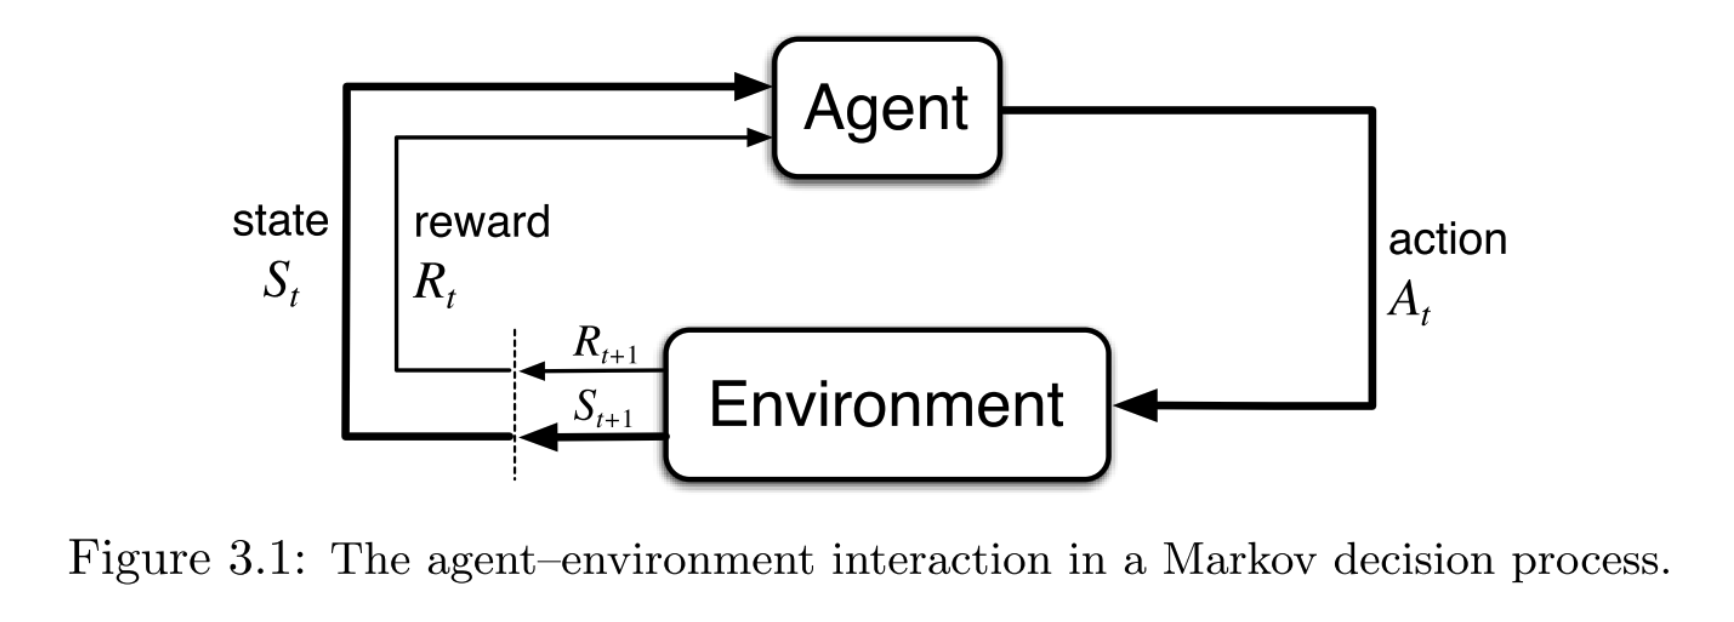 .sutton & barto on reinforcement learning.